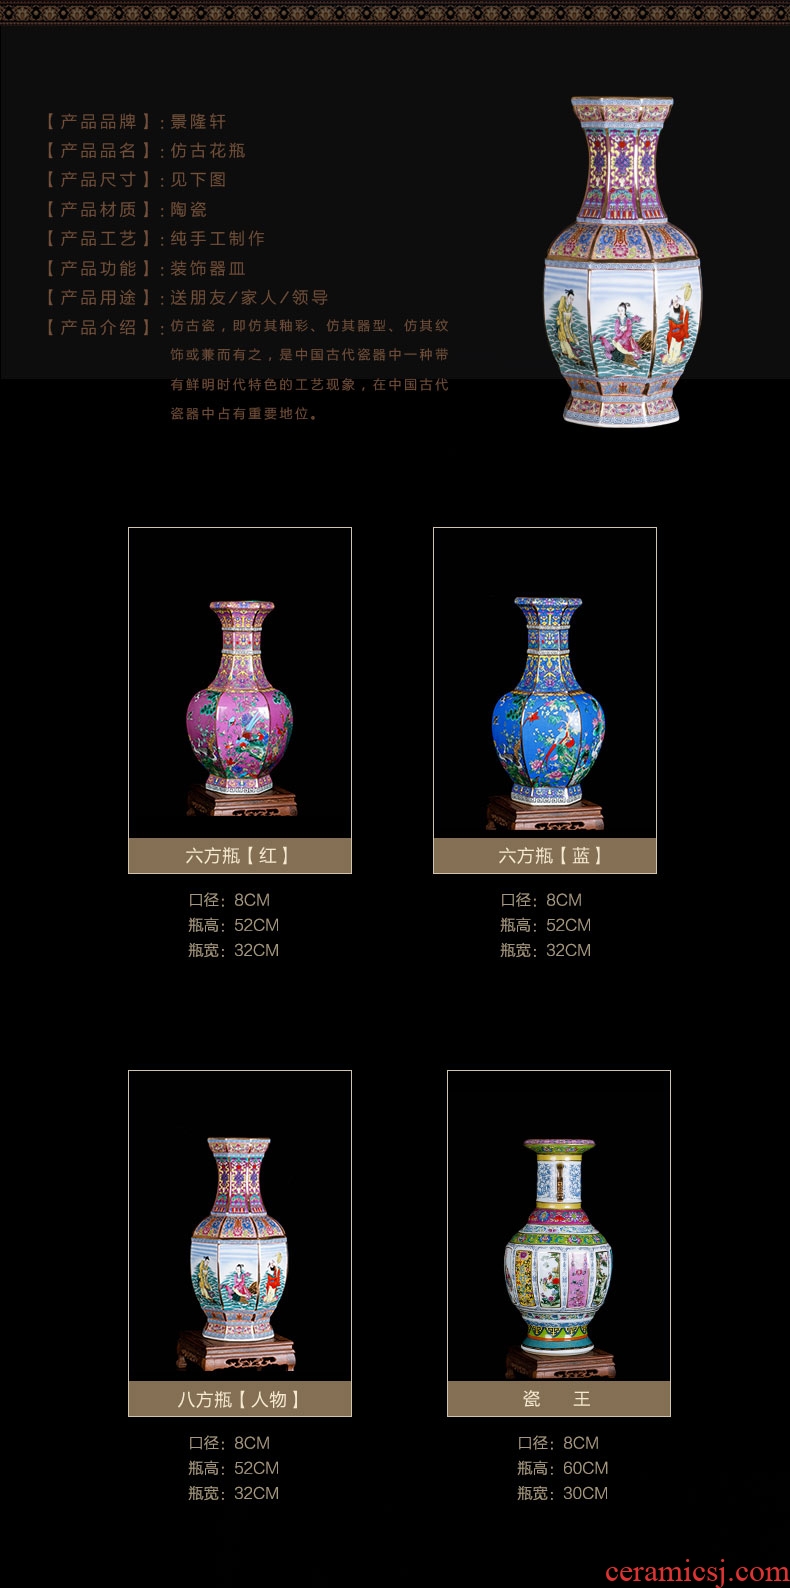 Jingdezhen porcelain industry the azure glaze ceramics founds a flat belly vase Chinese modern decor collection furnishing articles - 557292026908